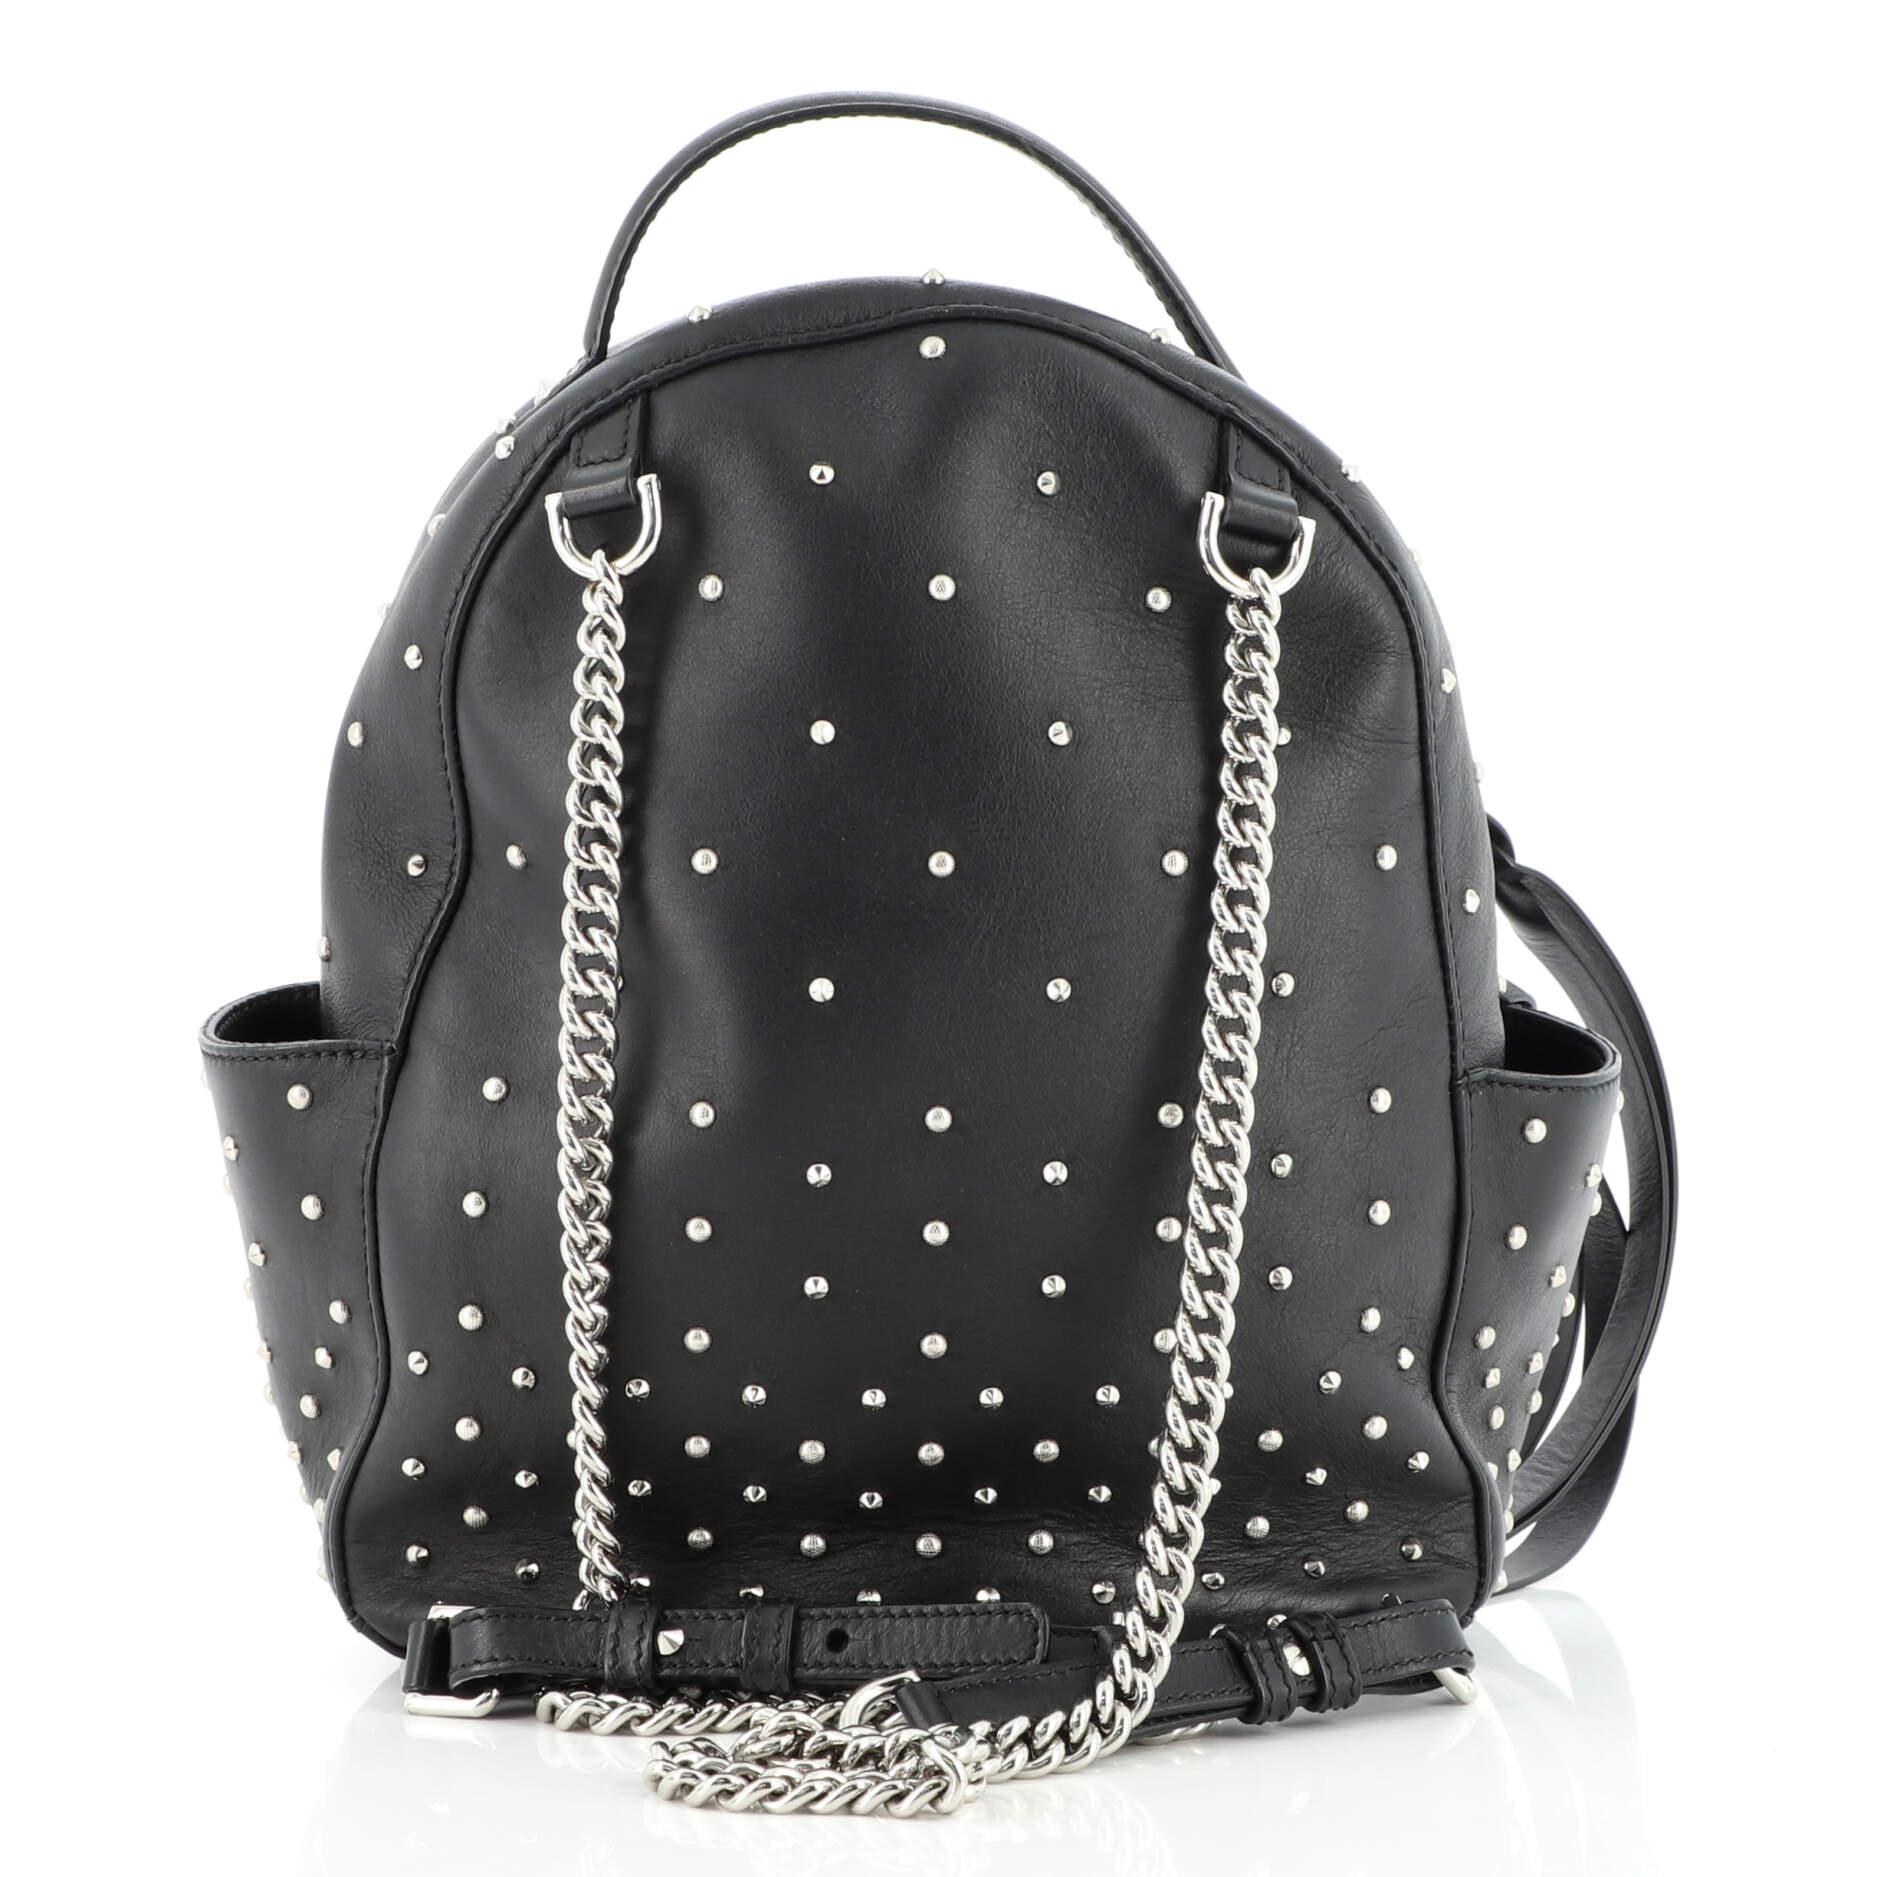 Black Alexander McQueen Front Zip Backpack Studded Leather Large